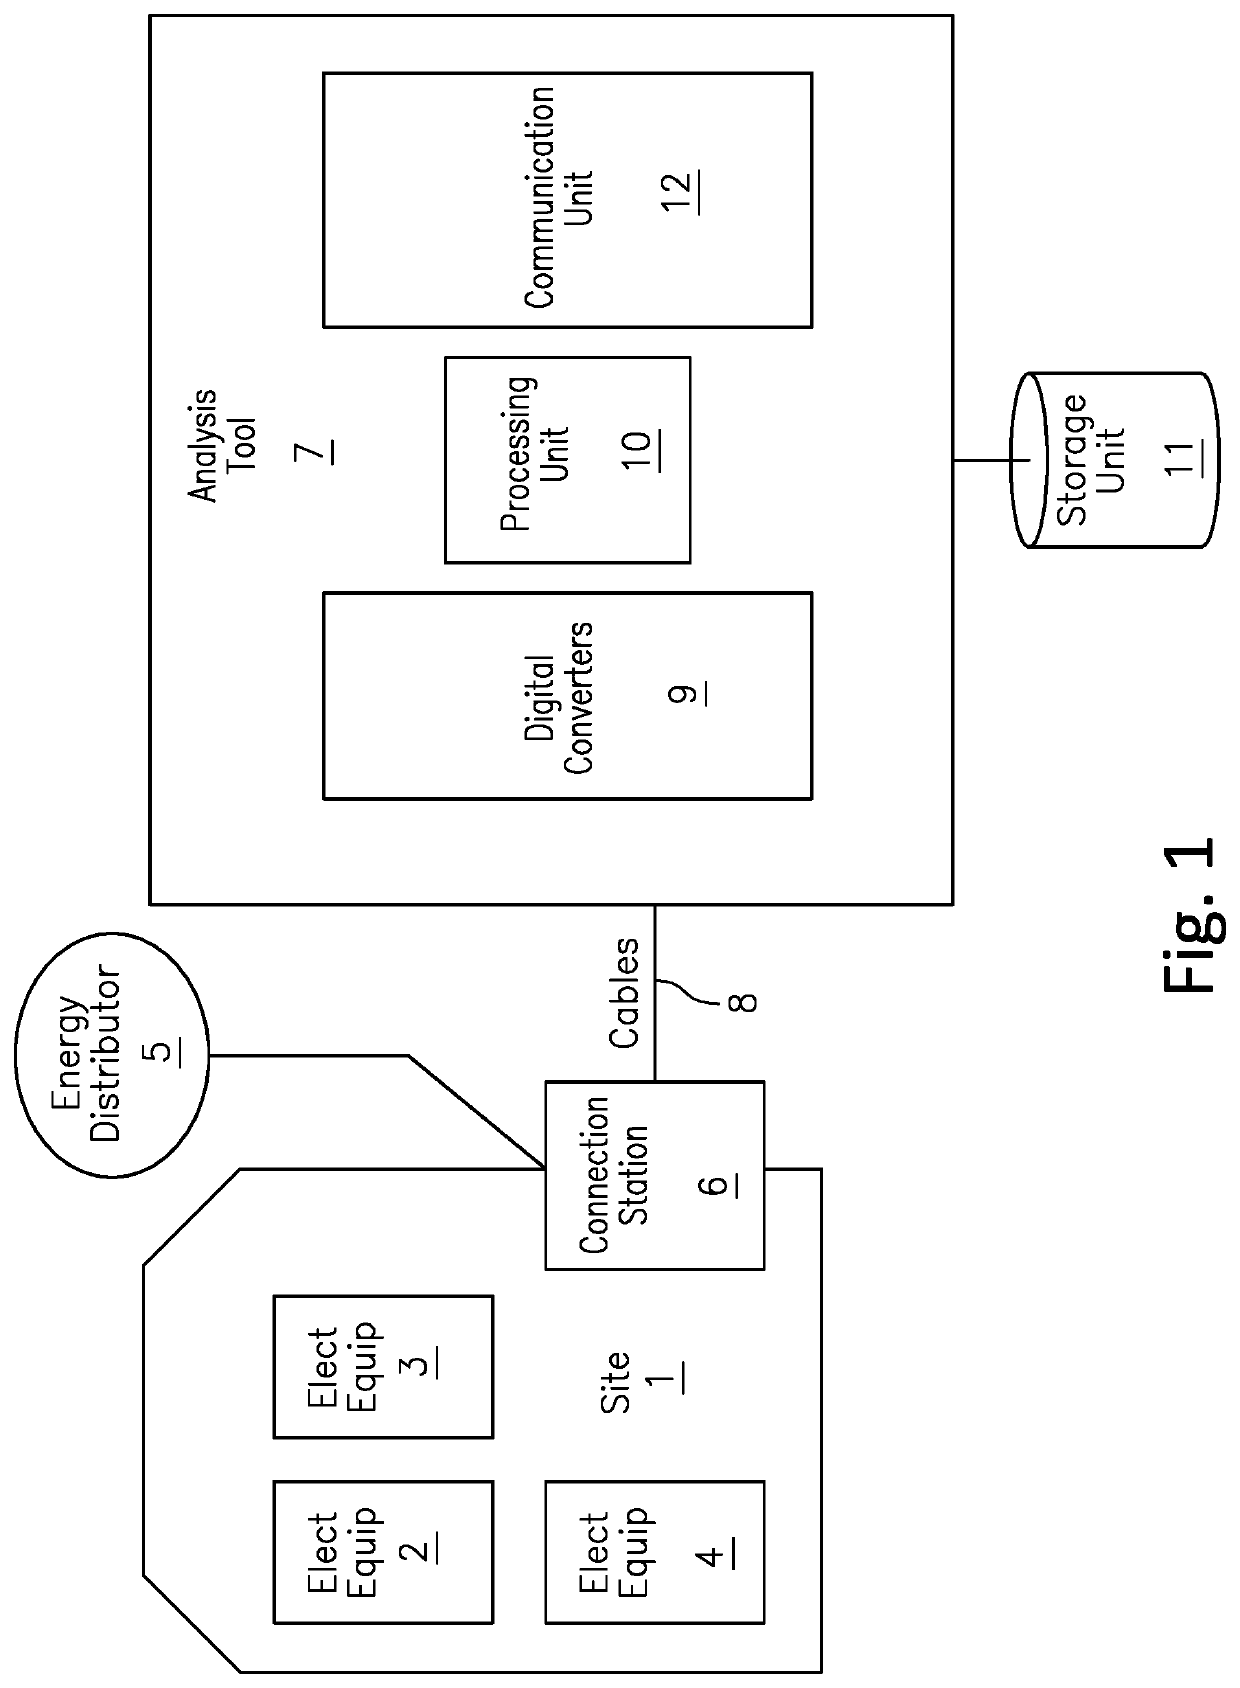 Method and system for analyzing electricity consumption